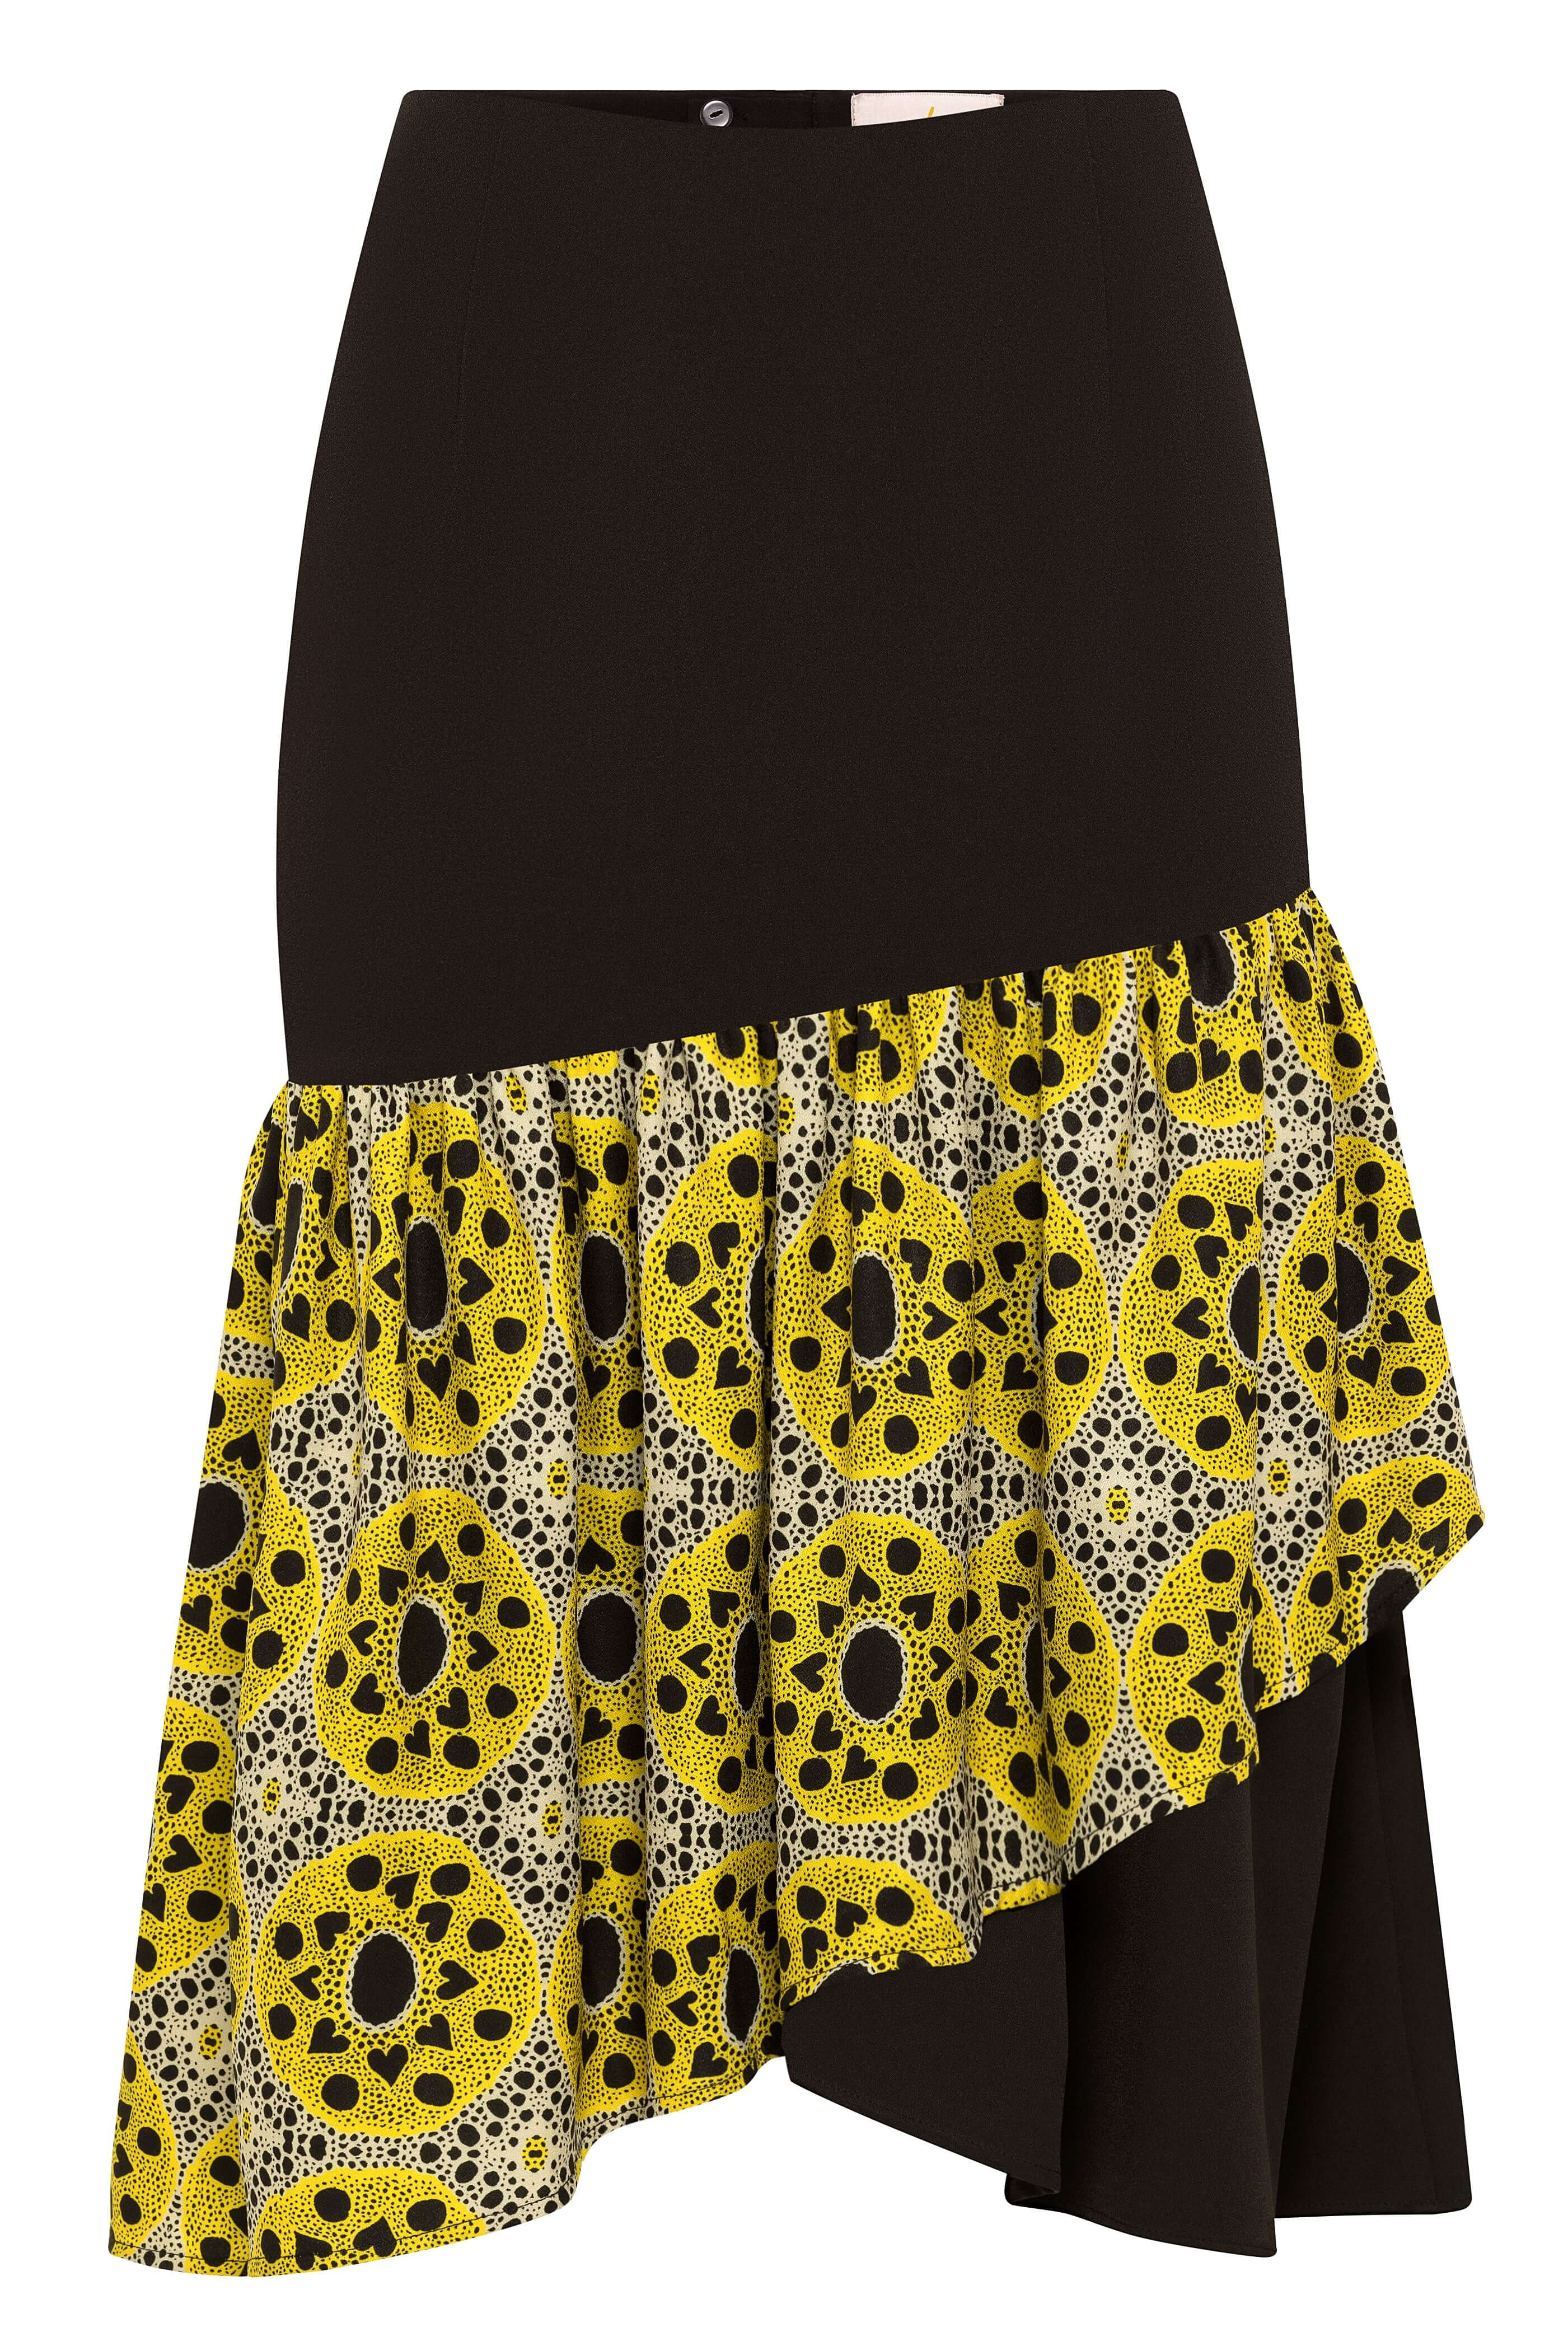 Sigi Fitted Midi Skirt Front View (Black & Yellow)